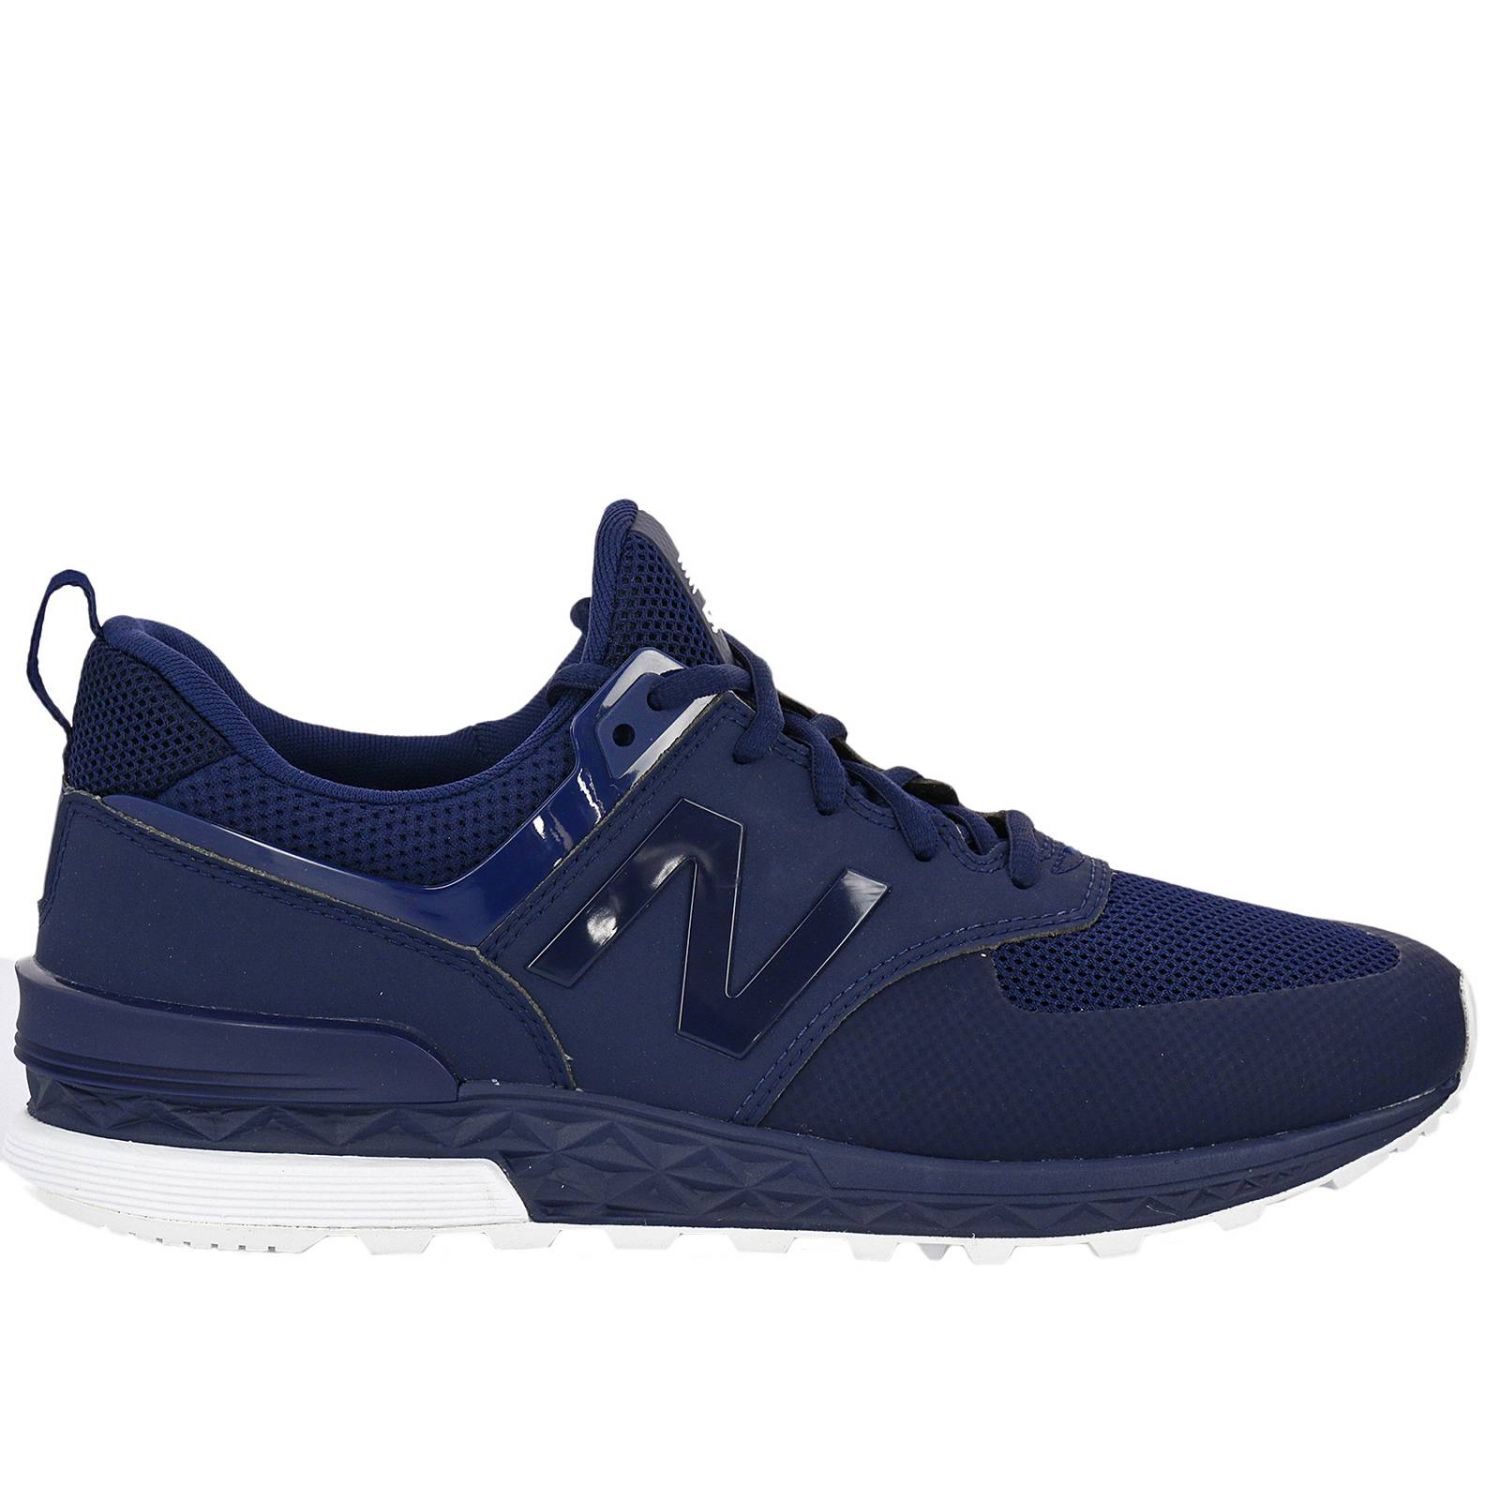 New Balance Outlet: Shoes men - Navy | Sneakers New Balance MS574SNV ...